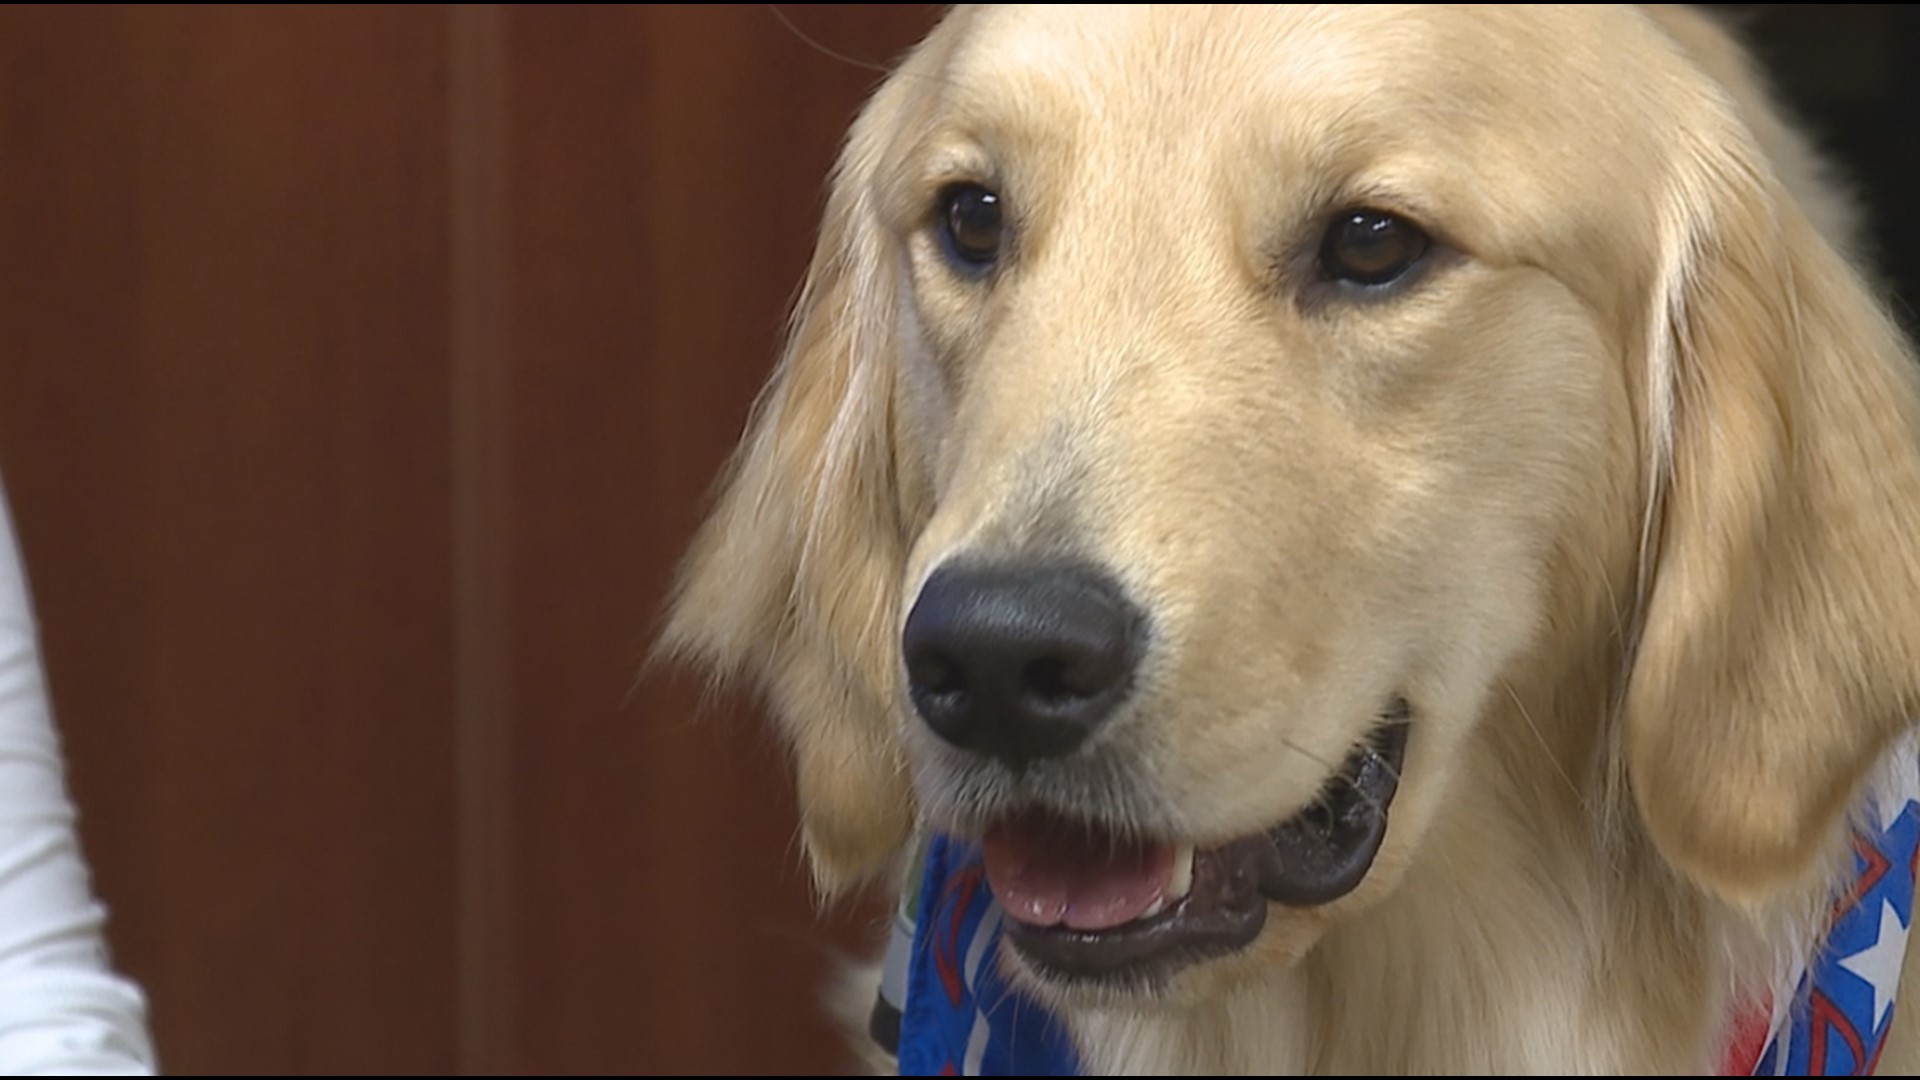 Captain is the hospital's third facility dog who will work with pediatric patients and lessen potential anxieties that come with going to the doctor.